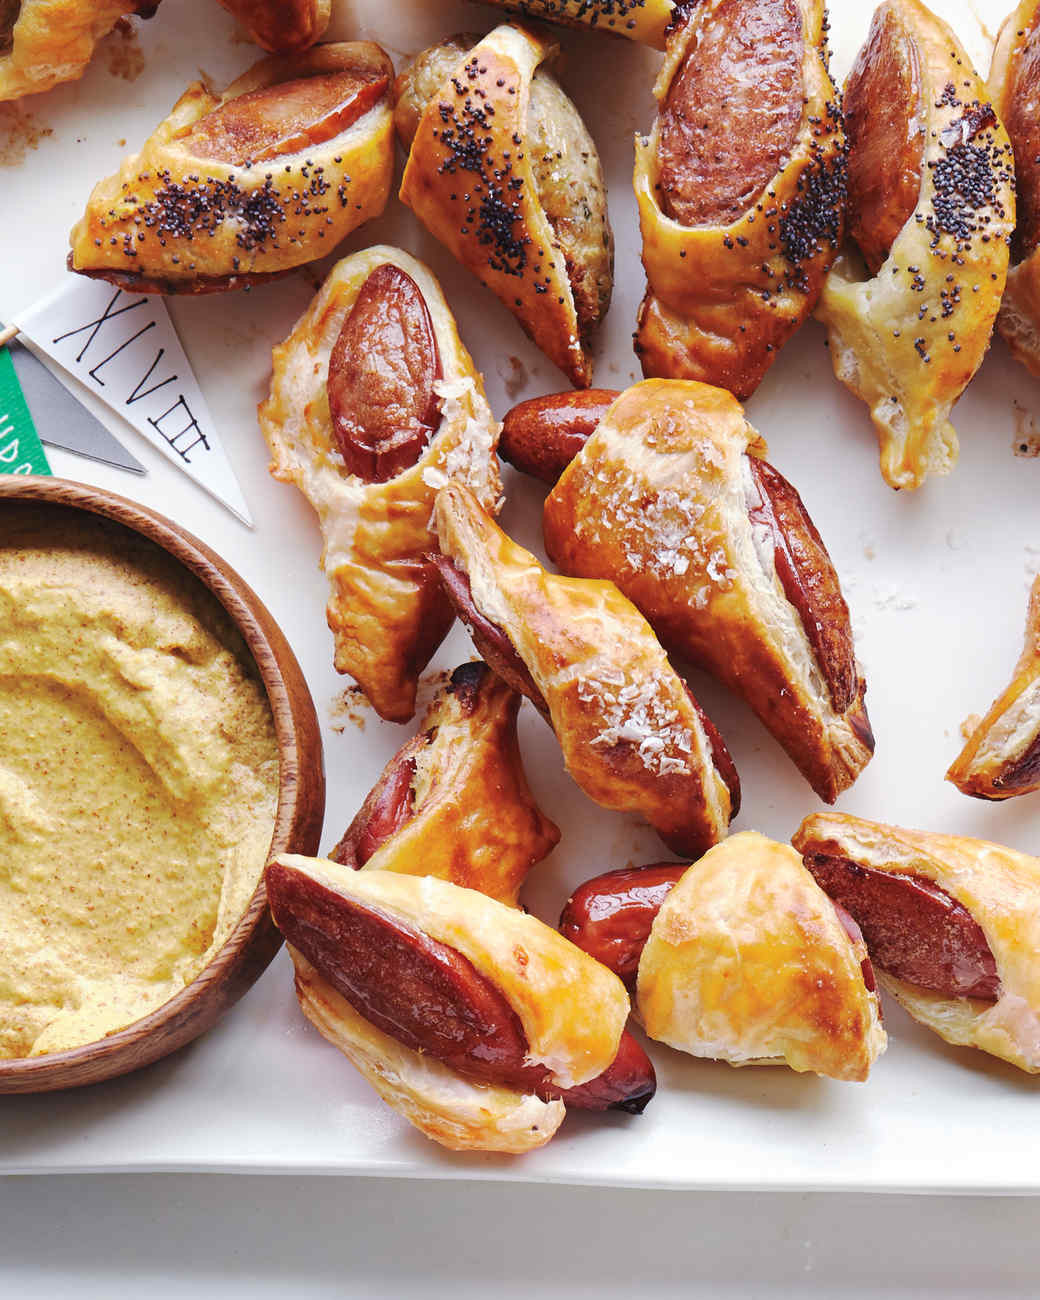 Martha Stewart Super Bowl Recipes
 It s Super Bowl Time The 50 Best Snacks to Serve on Game Day